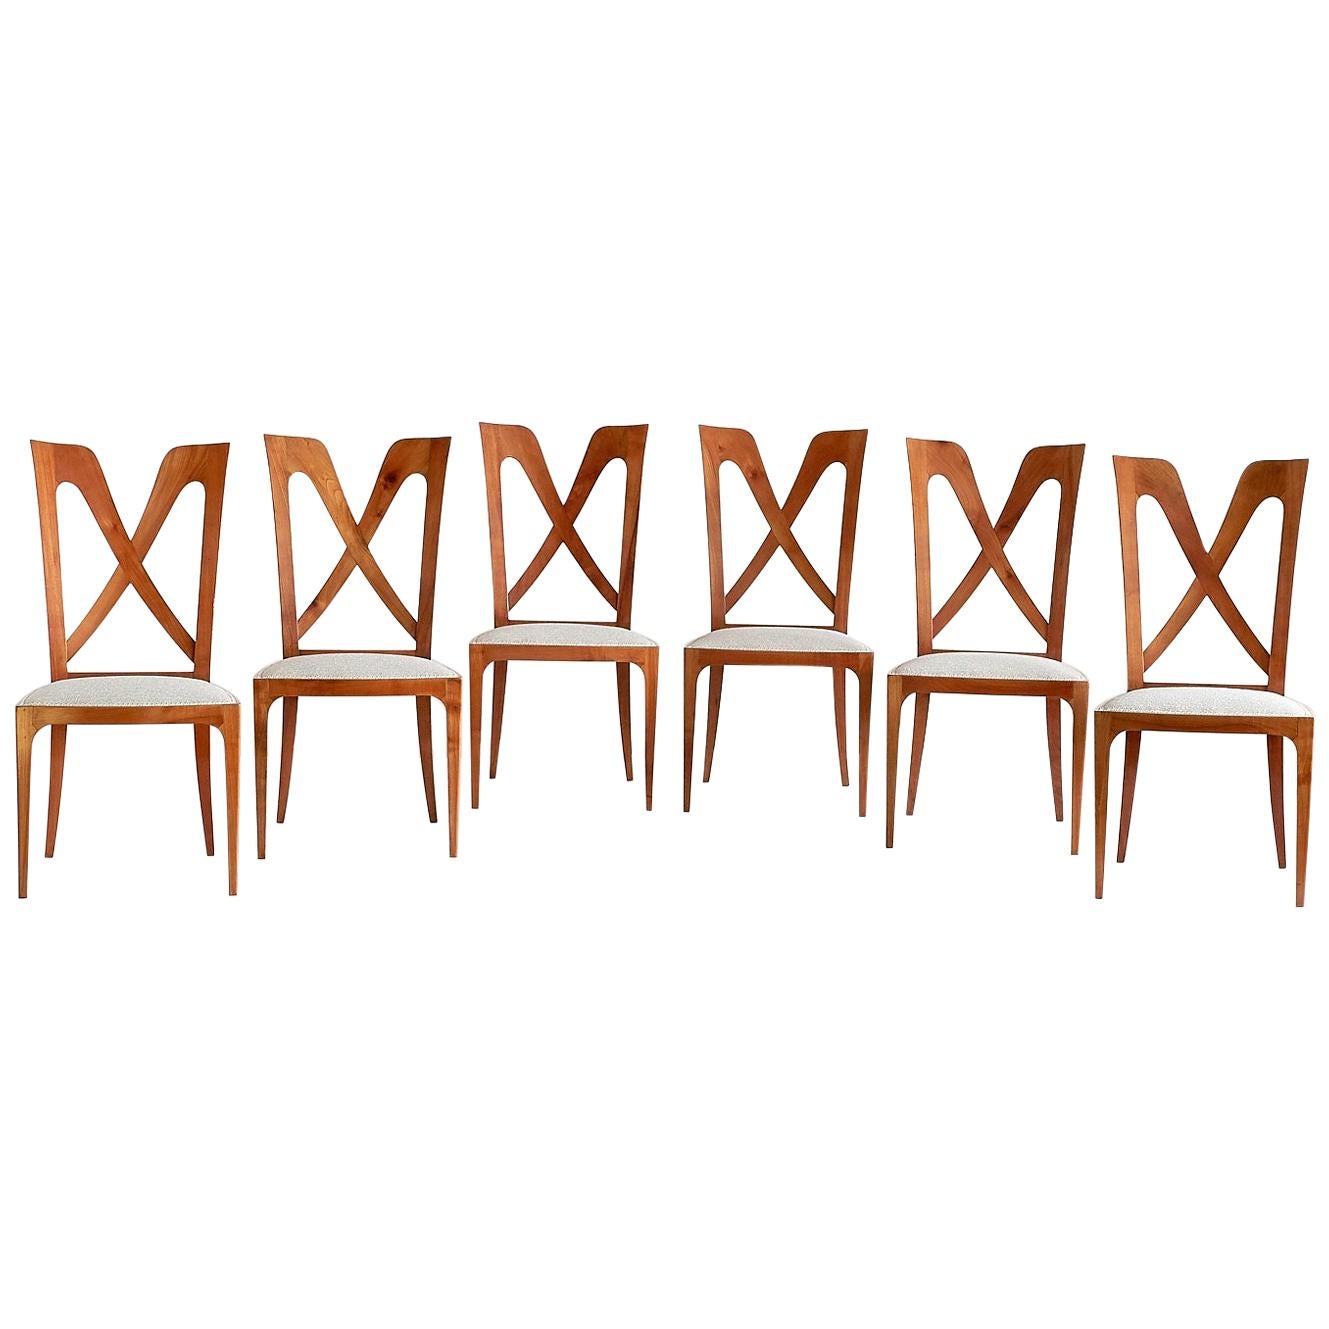 Set of Six Ulderico Carlo Forni Dining Chairs in Cherry Wood, Italy, 1940s For Sale